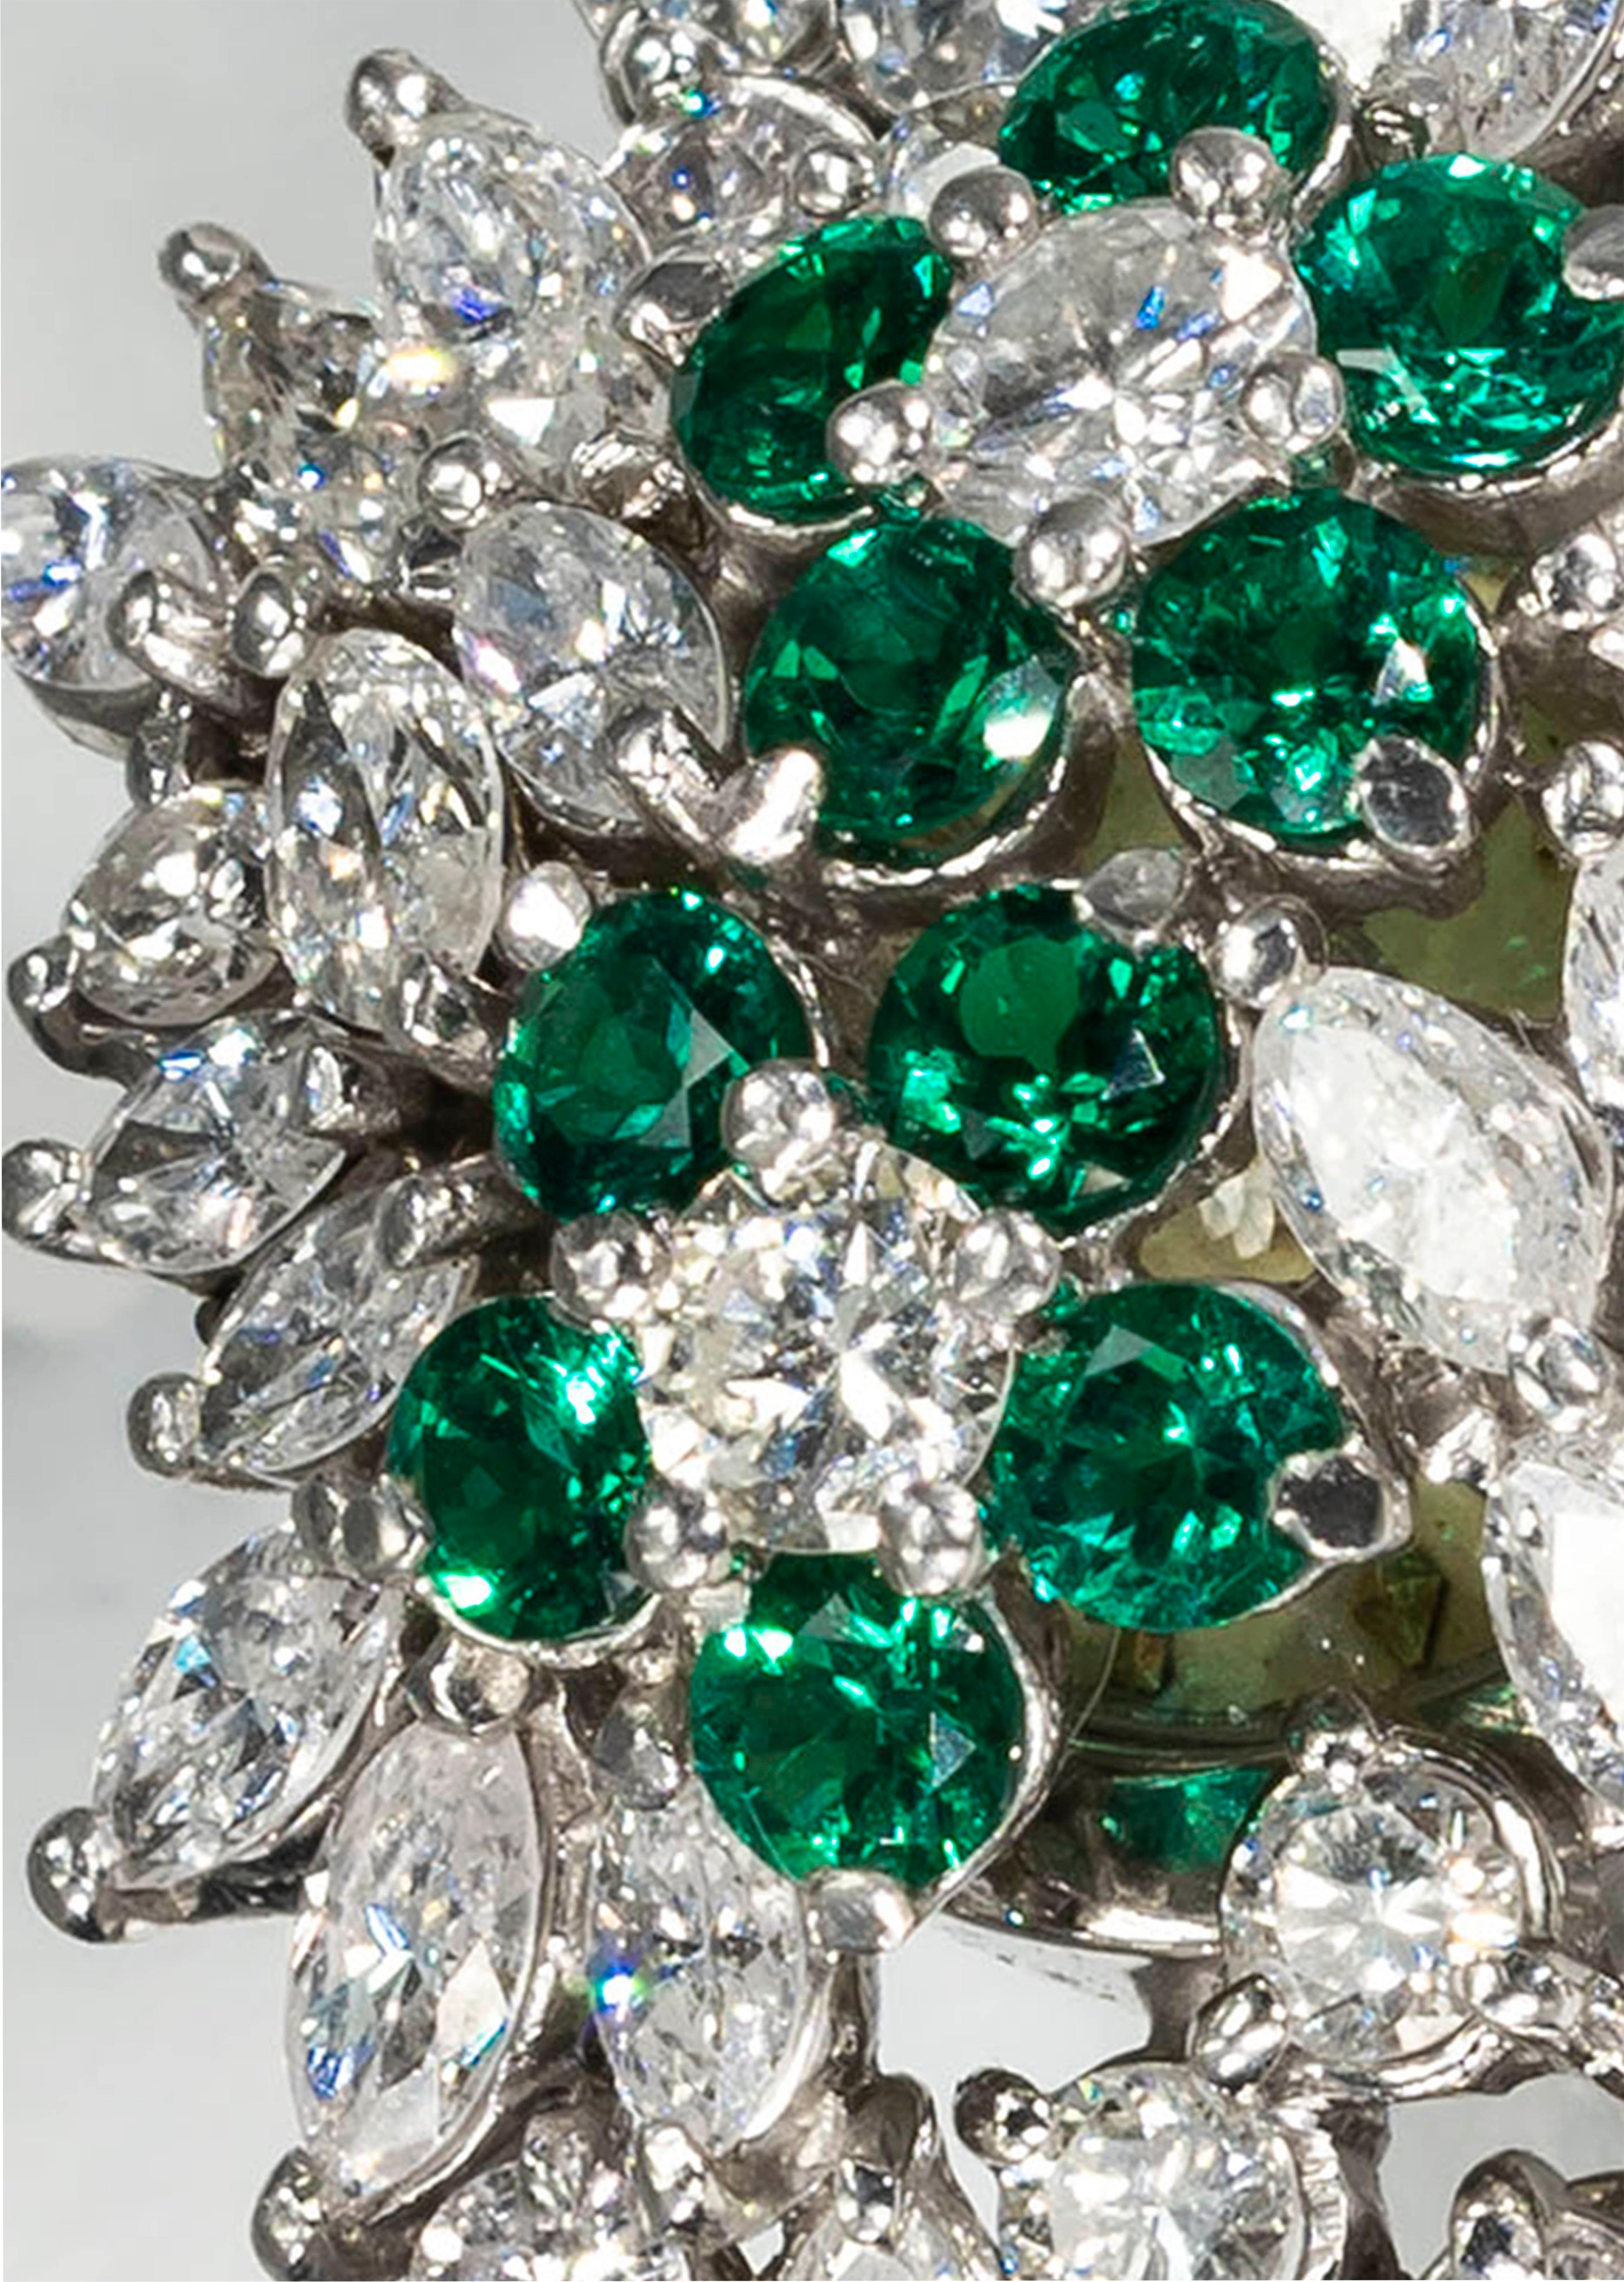 A Very Impressive Special 1970s Platinum Piaget Marquis Cut Diamond & Double Emerald Set Flower Concealed Bracelet Watch with 210 stones
totaling approximately 25 carats

Basic Specifications & Case Dimensions
- 18mm Case Dimension
- 12mm Dial